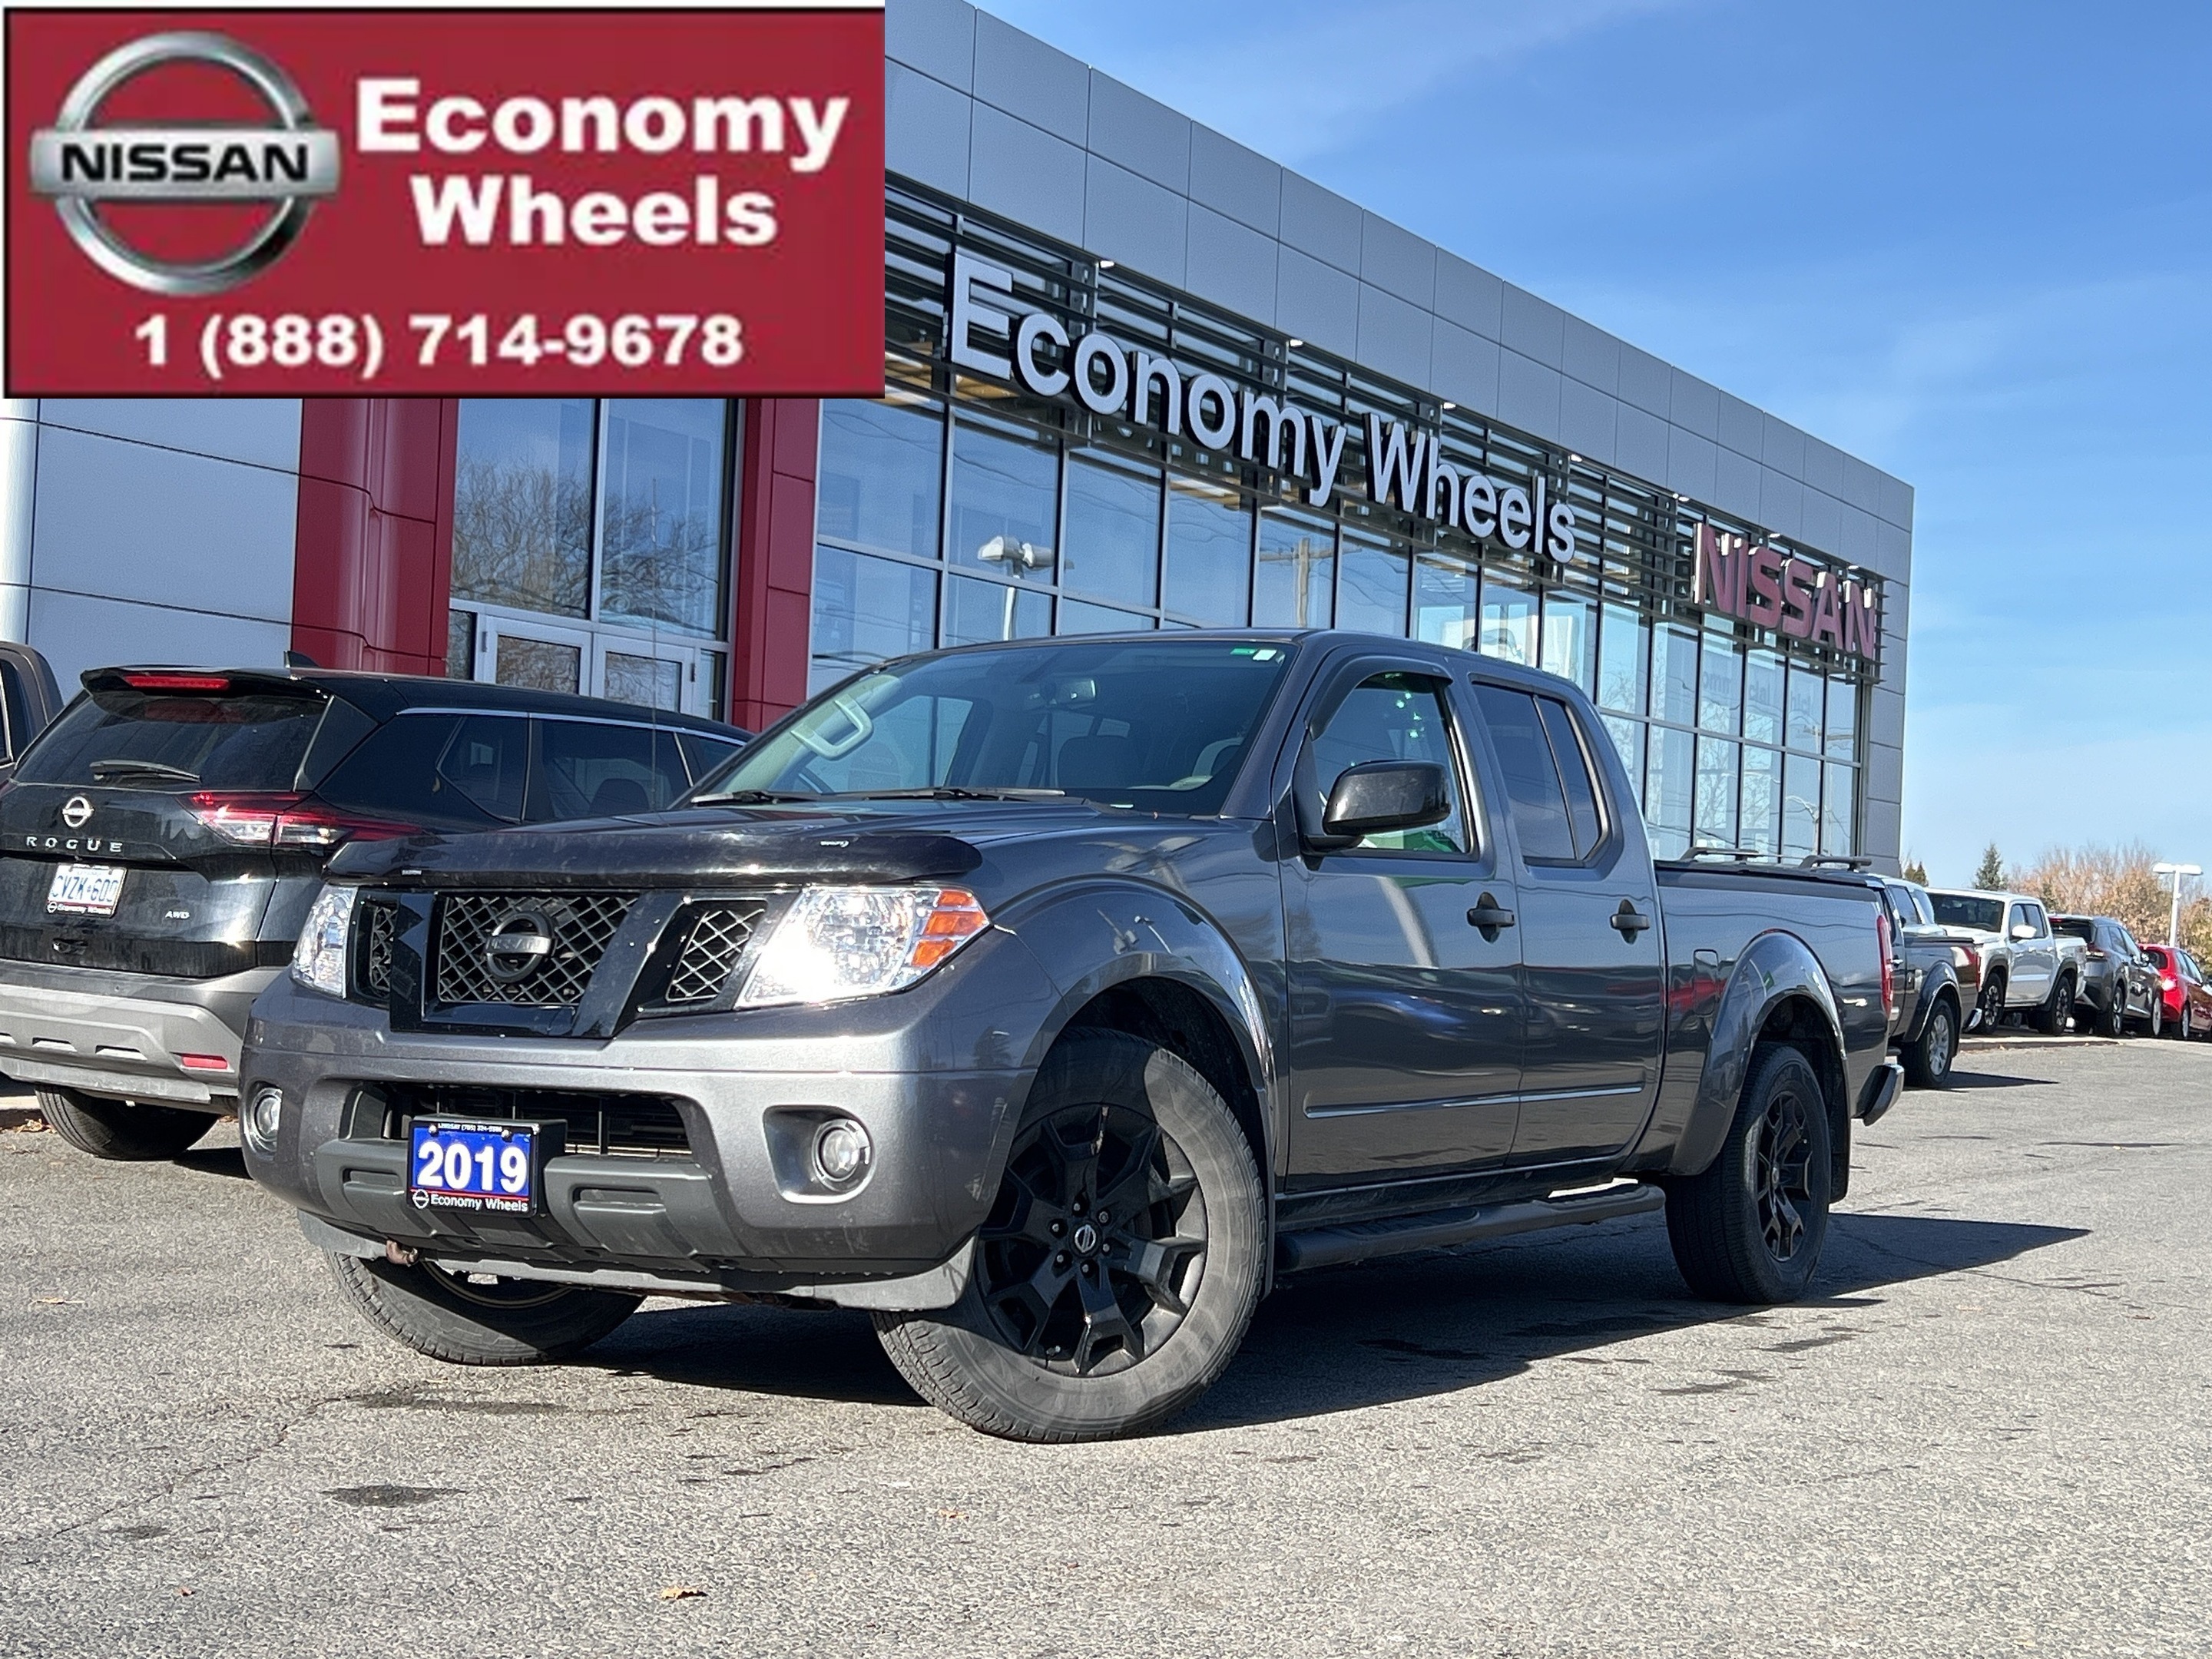 2019 Nissan Frontier Midnight w/Bluetooth/4x4/HtdSeats/DualAC/BedLiner